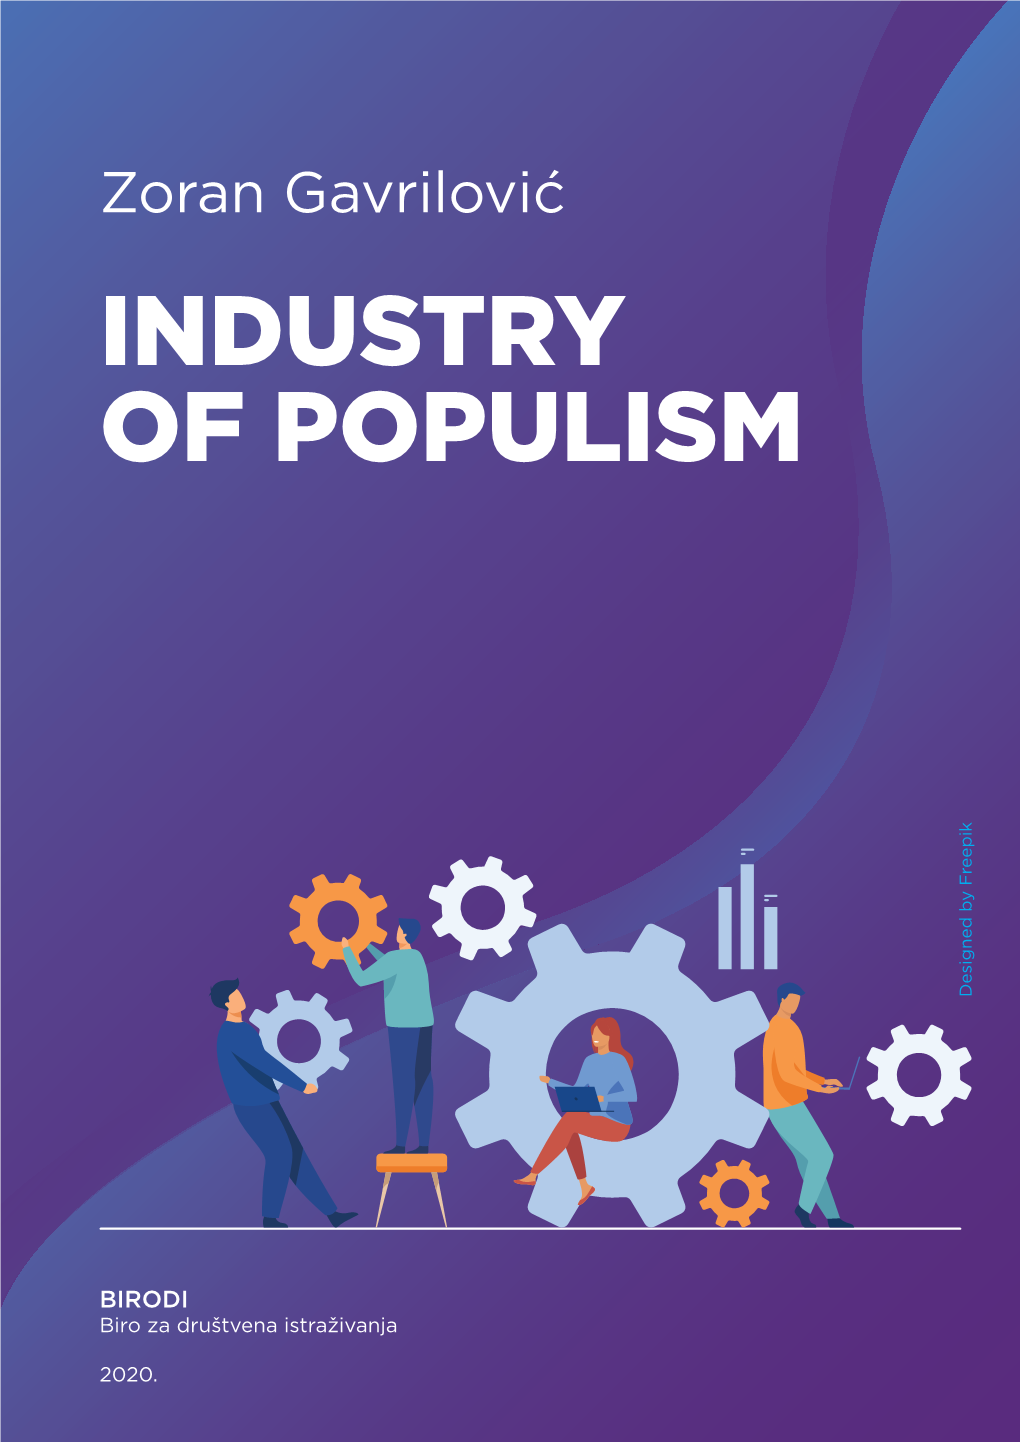 Industry of Populism